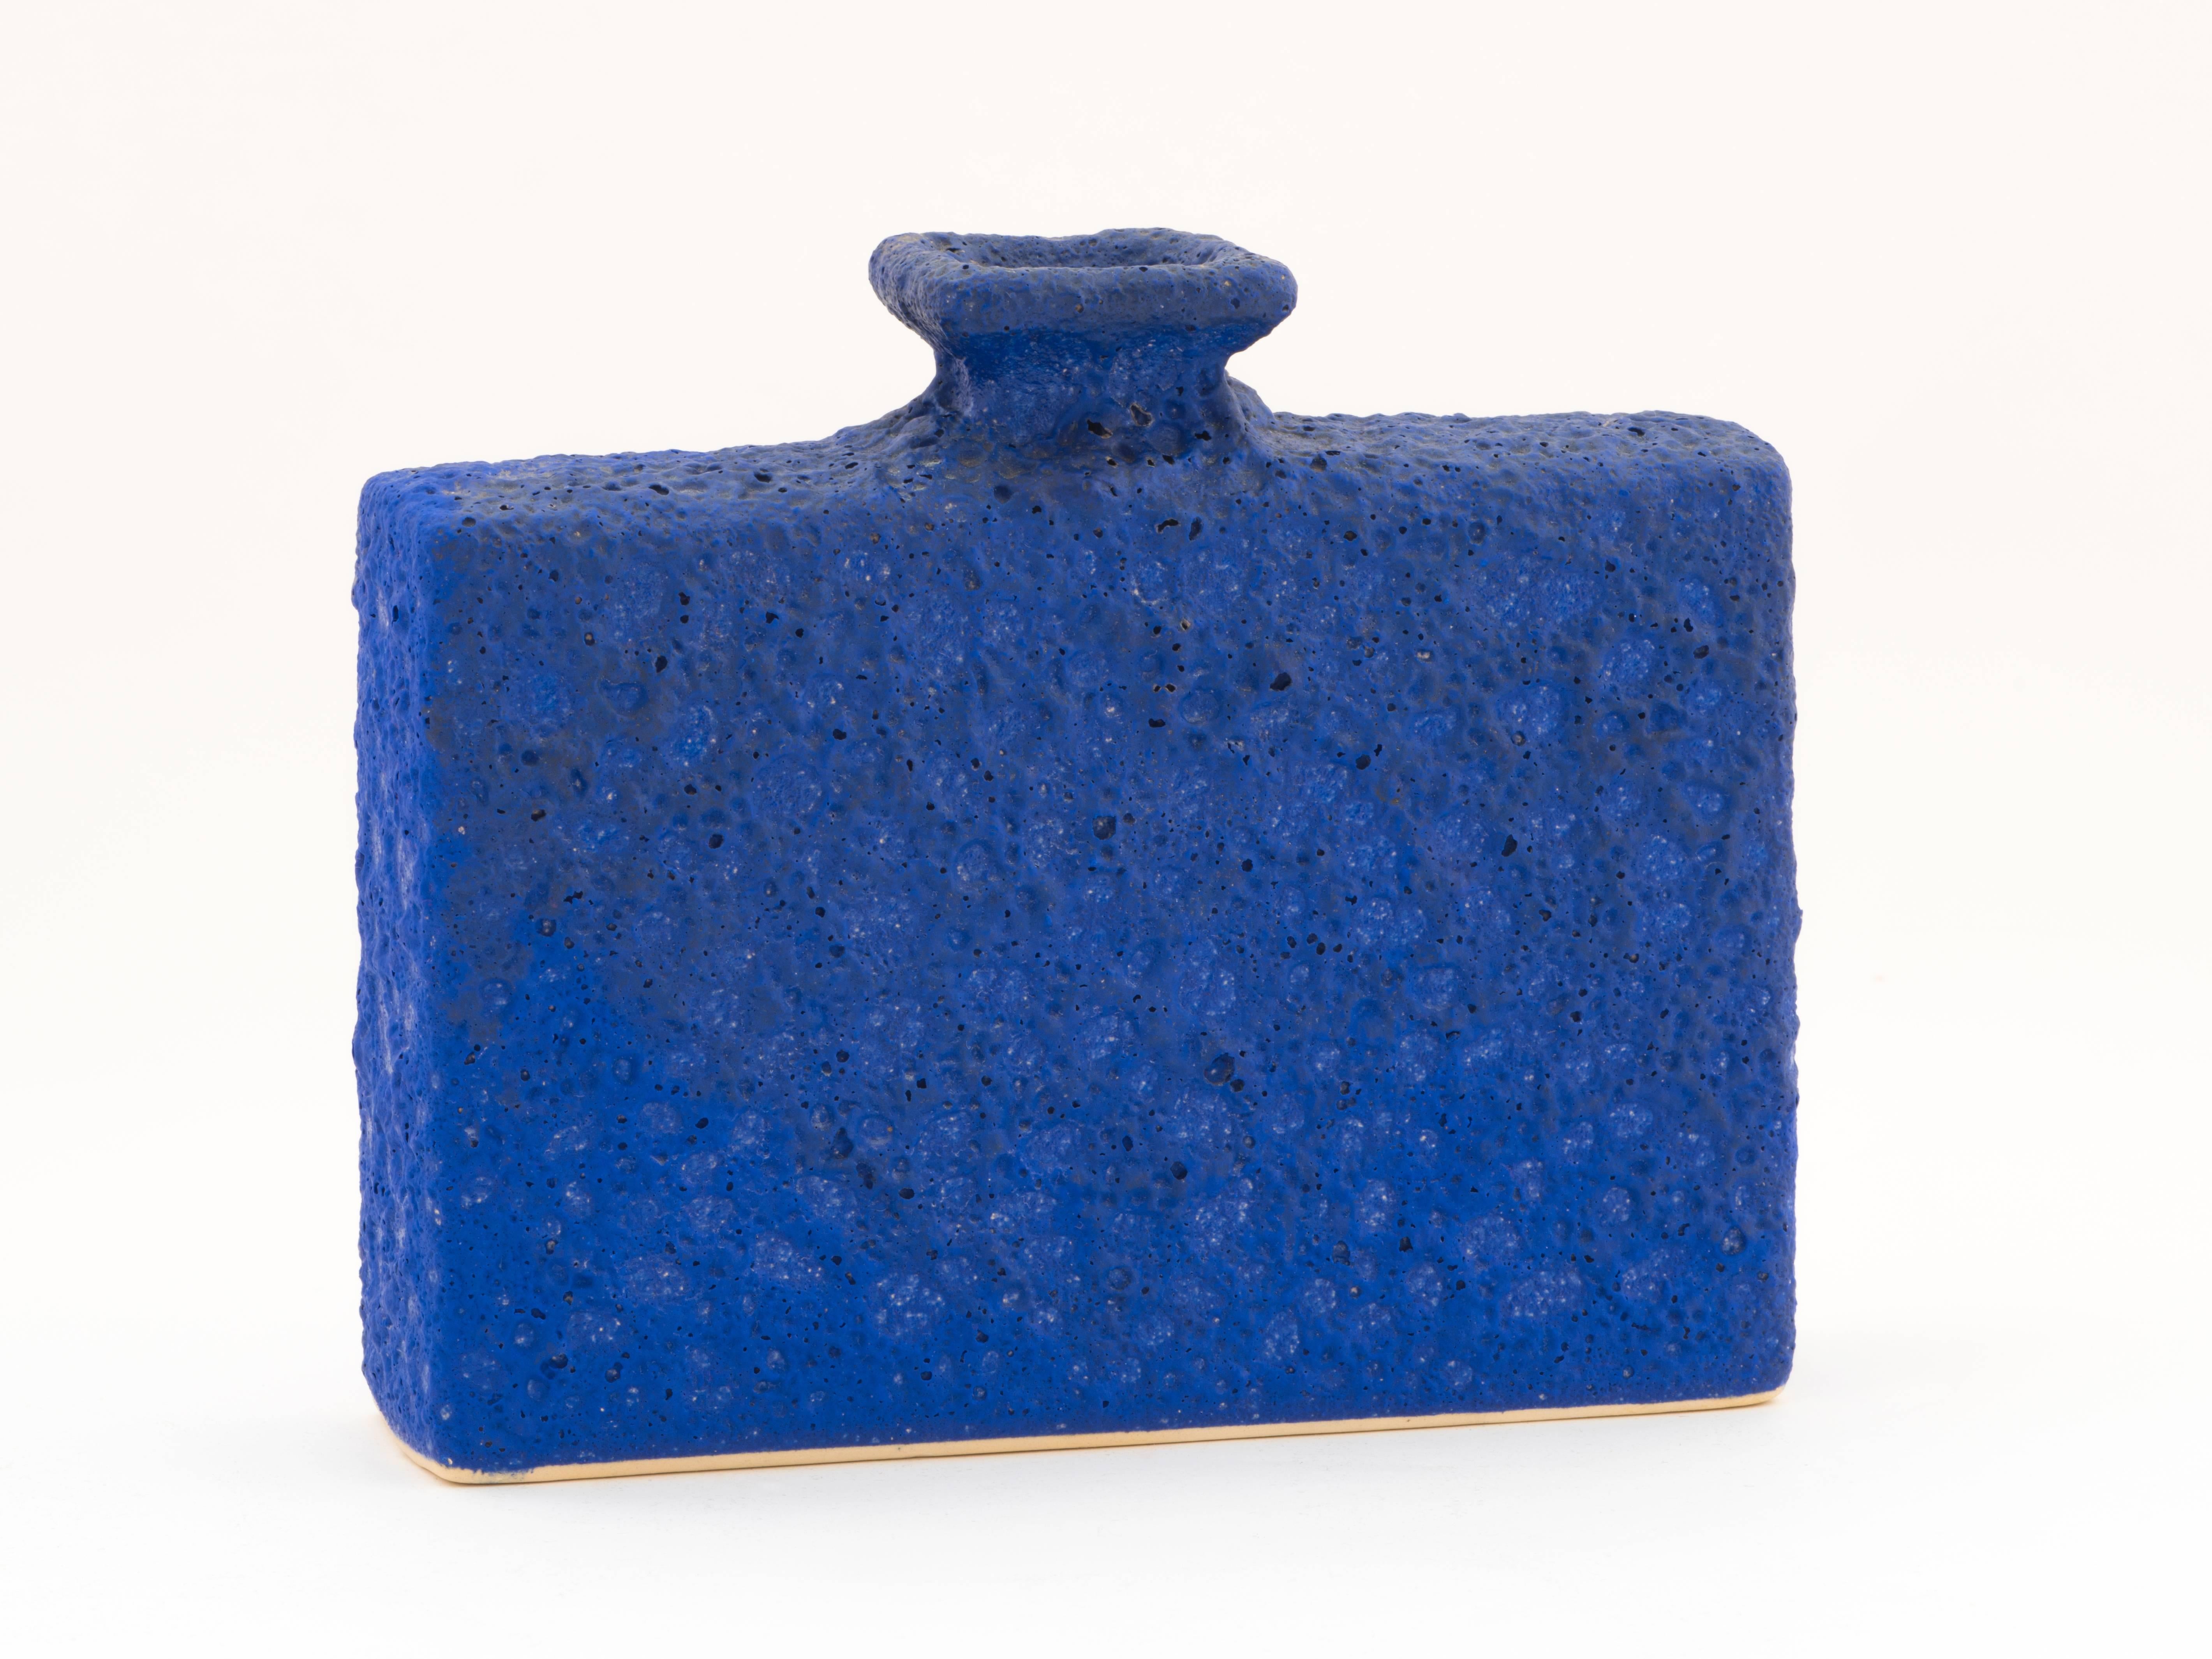 Mid-20th Century 1960s West German Volcanic Glaze Vase as Tribute to Yves Klein